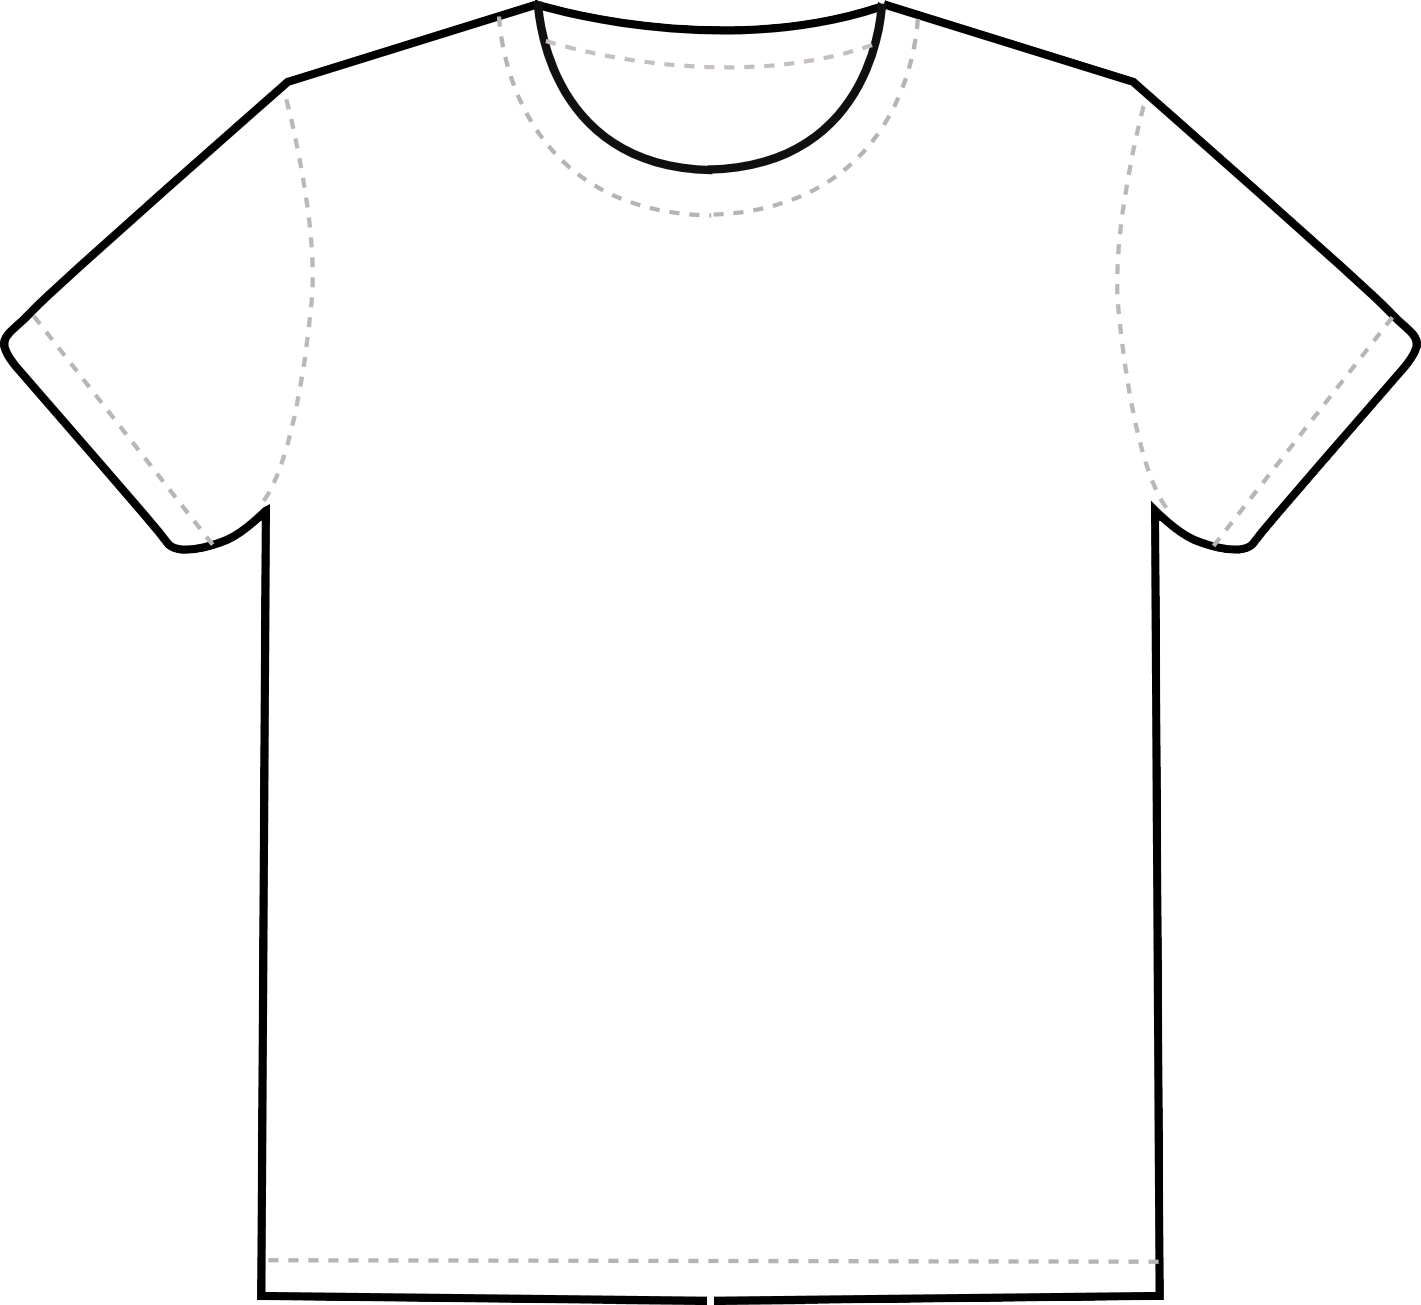 A White Shirt With Black Background